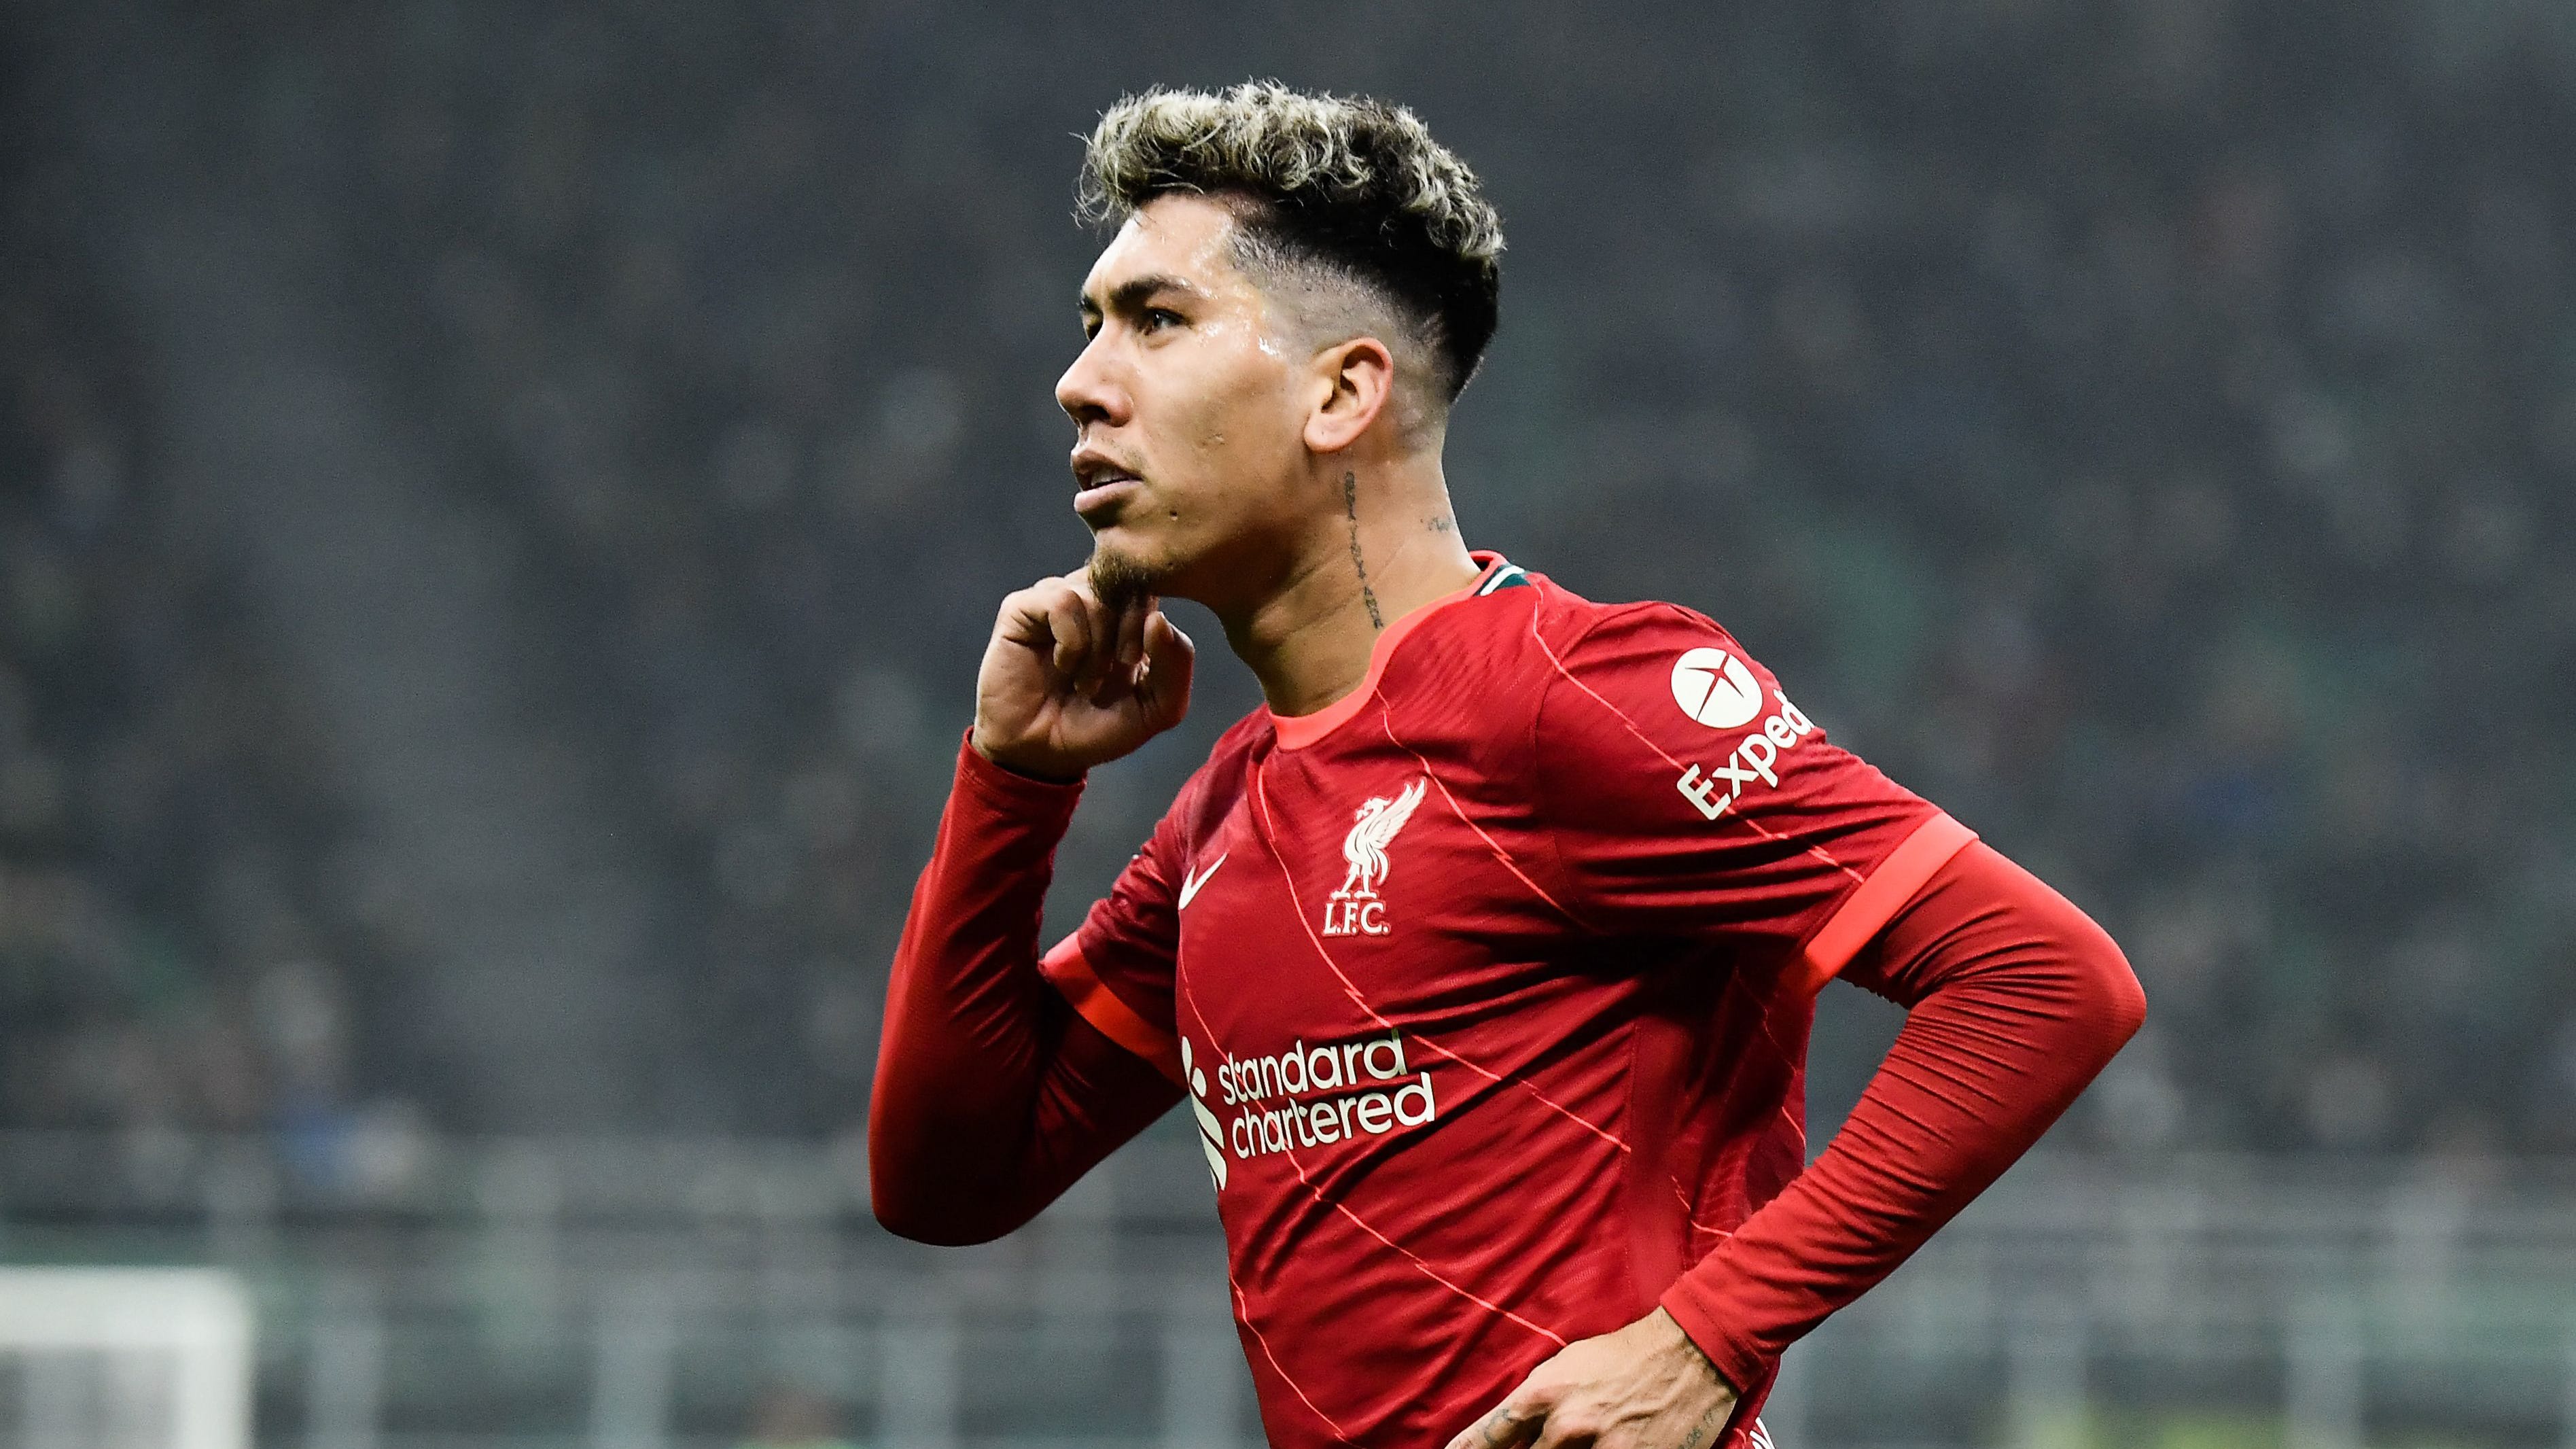 tand Final dråbe Si Senor' - Lyrics, video & meaning of Liverpool fans' Firmino song |  Goal.com US